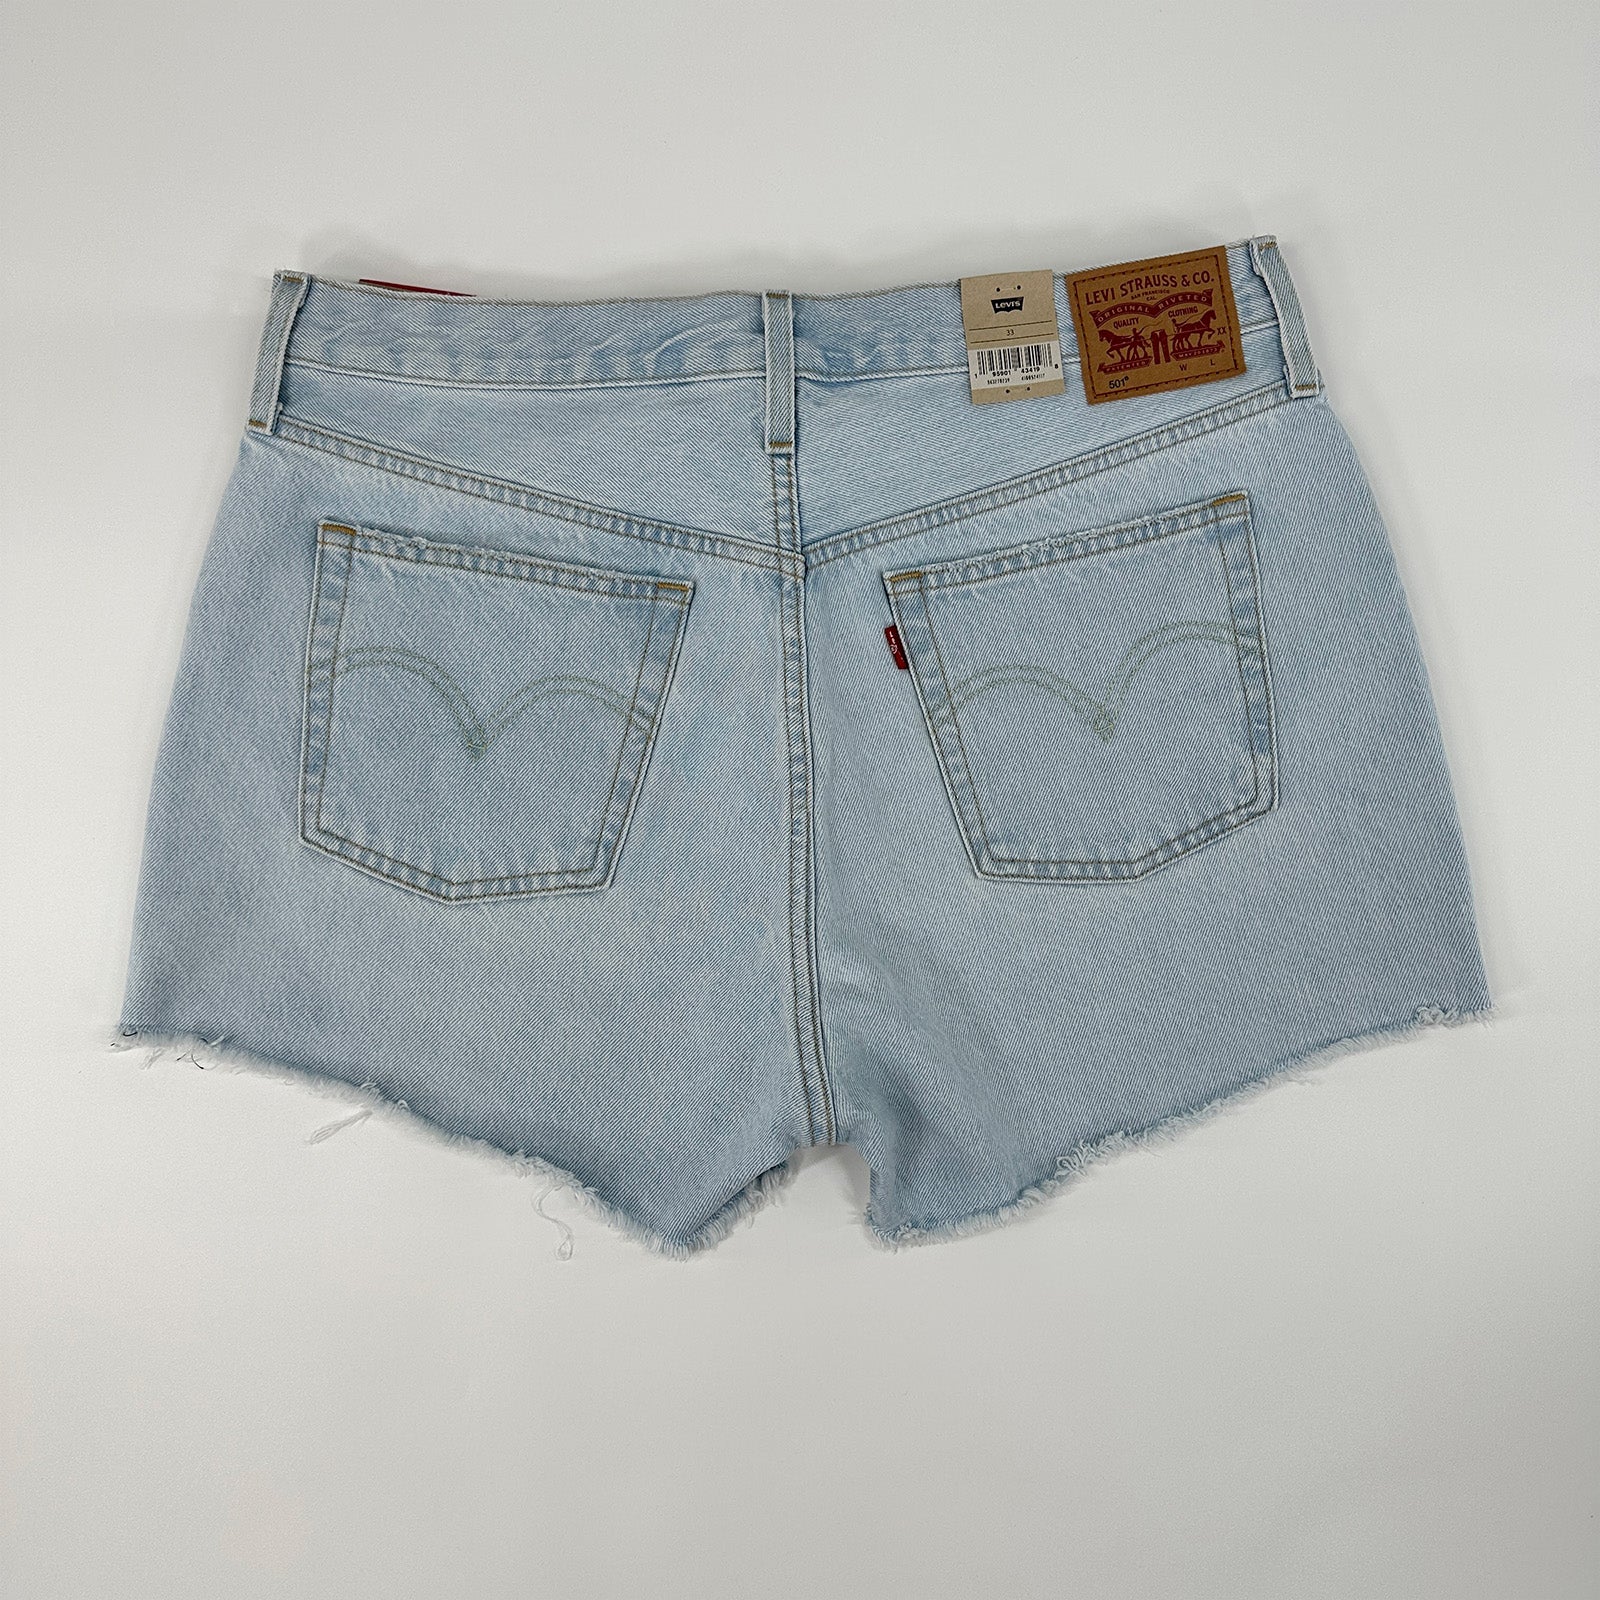 Levi's 501 Raw Edge Denim Shorts - New With Tags Great Lakes Reclaimed Denim